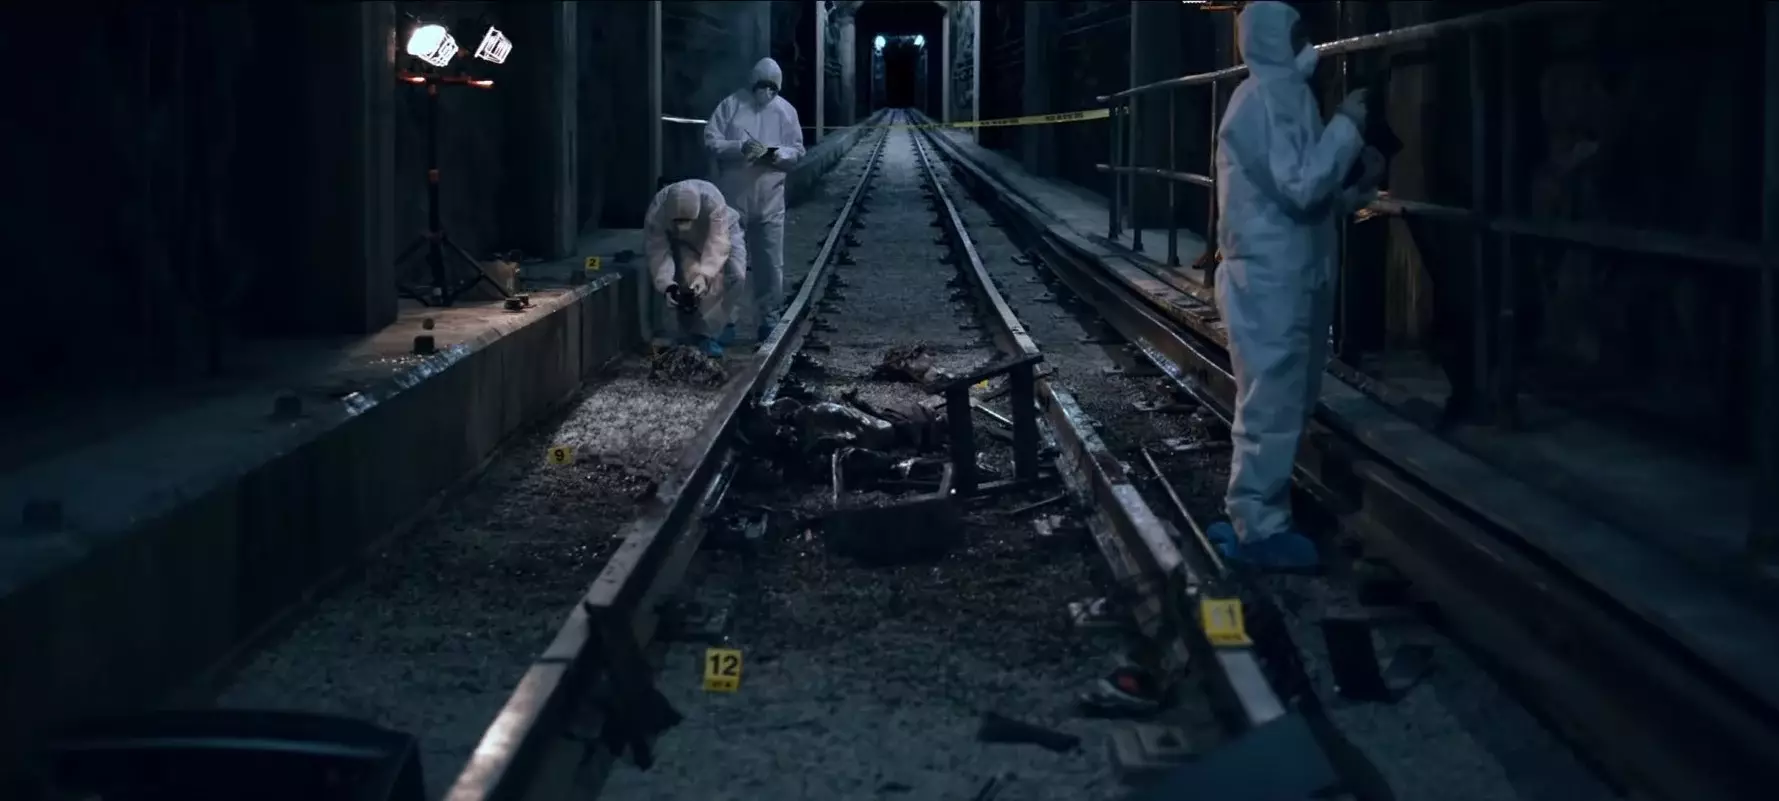 A body is discovered on an underground train track (